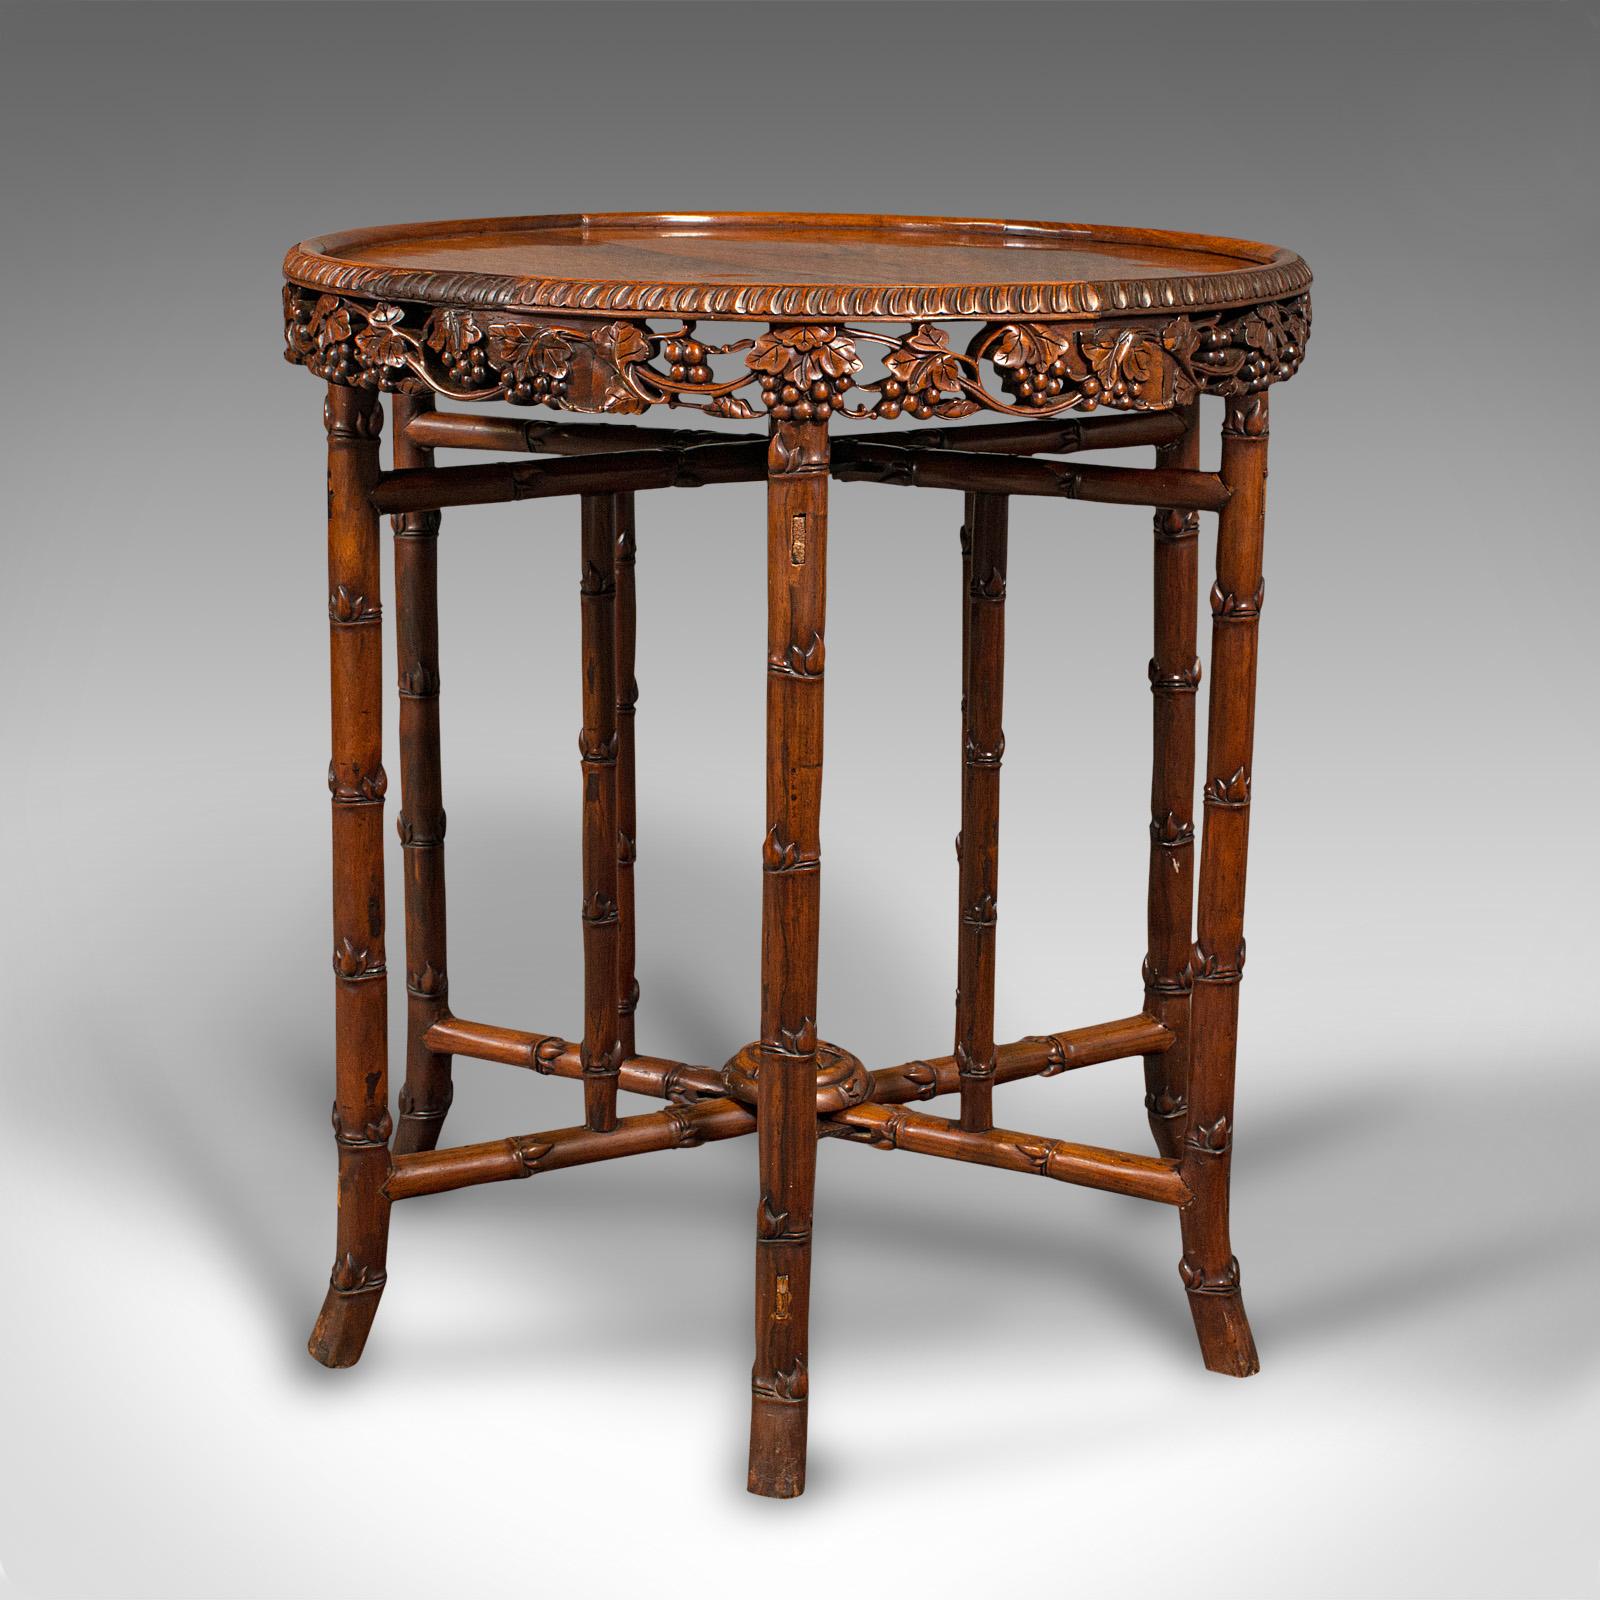 British Antique Carved Campaign Table, Anglo Indian, Folding, Colonial, Victorian, 1880